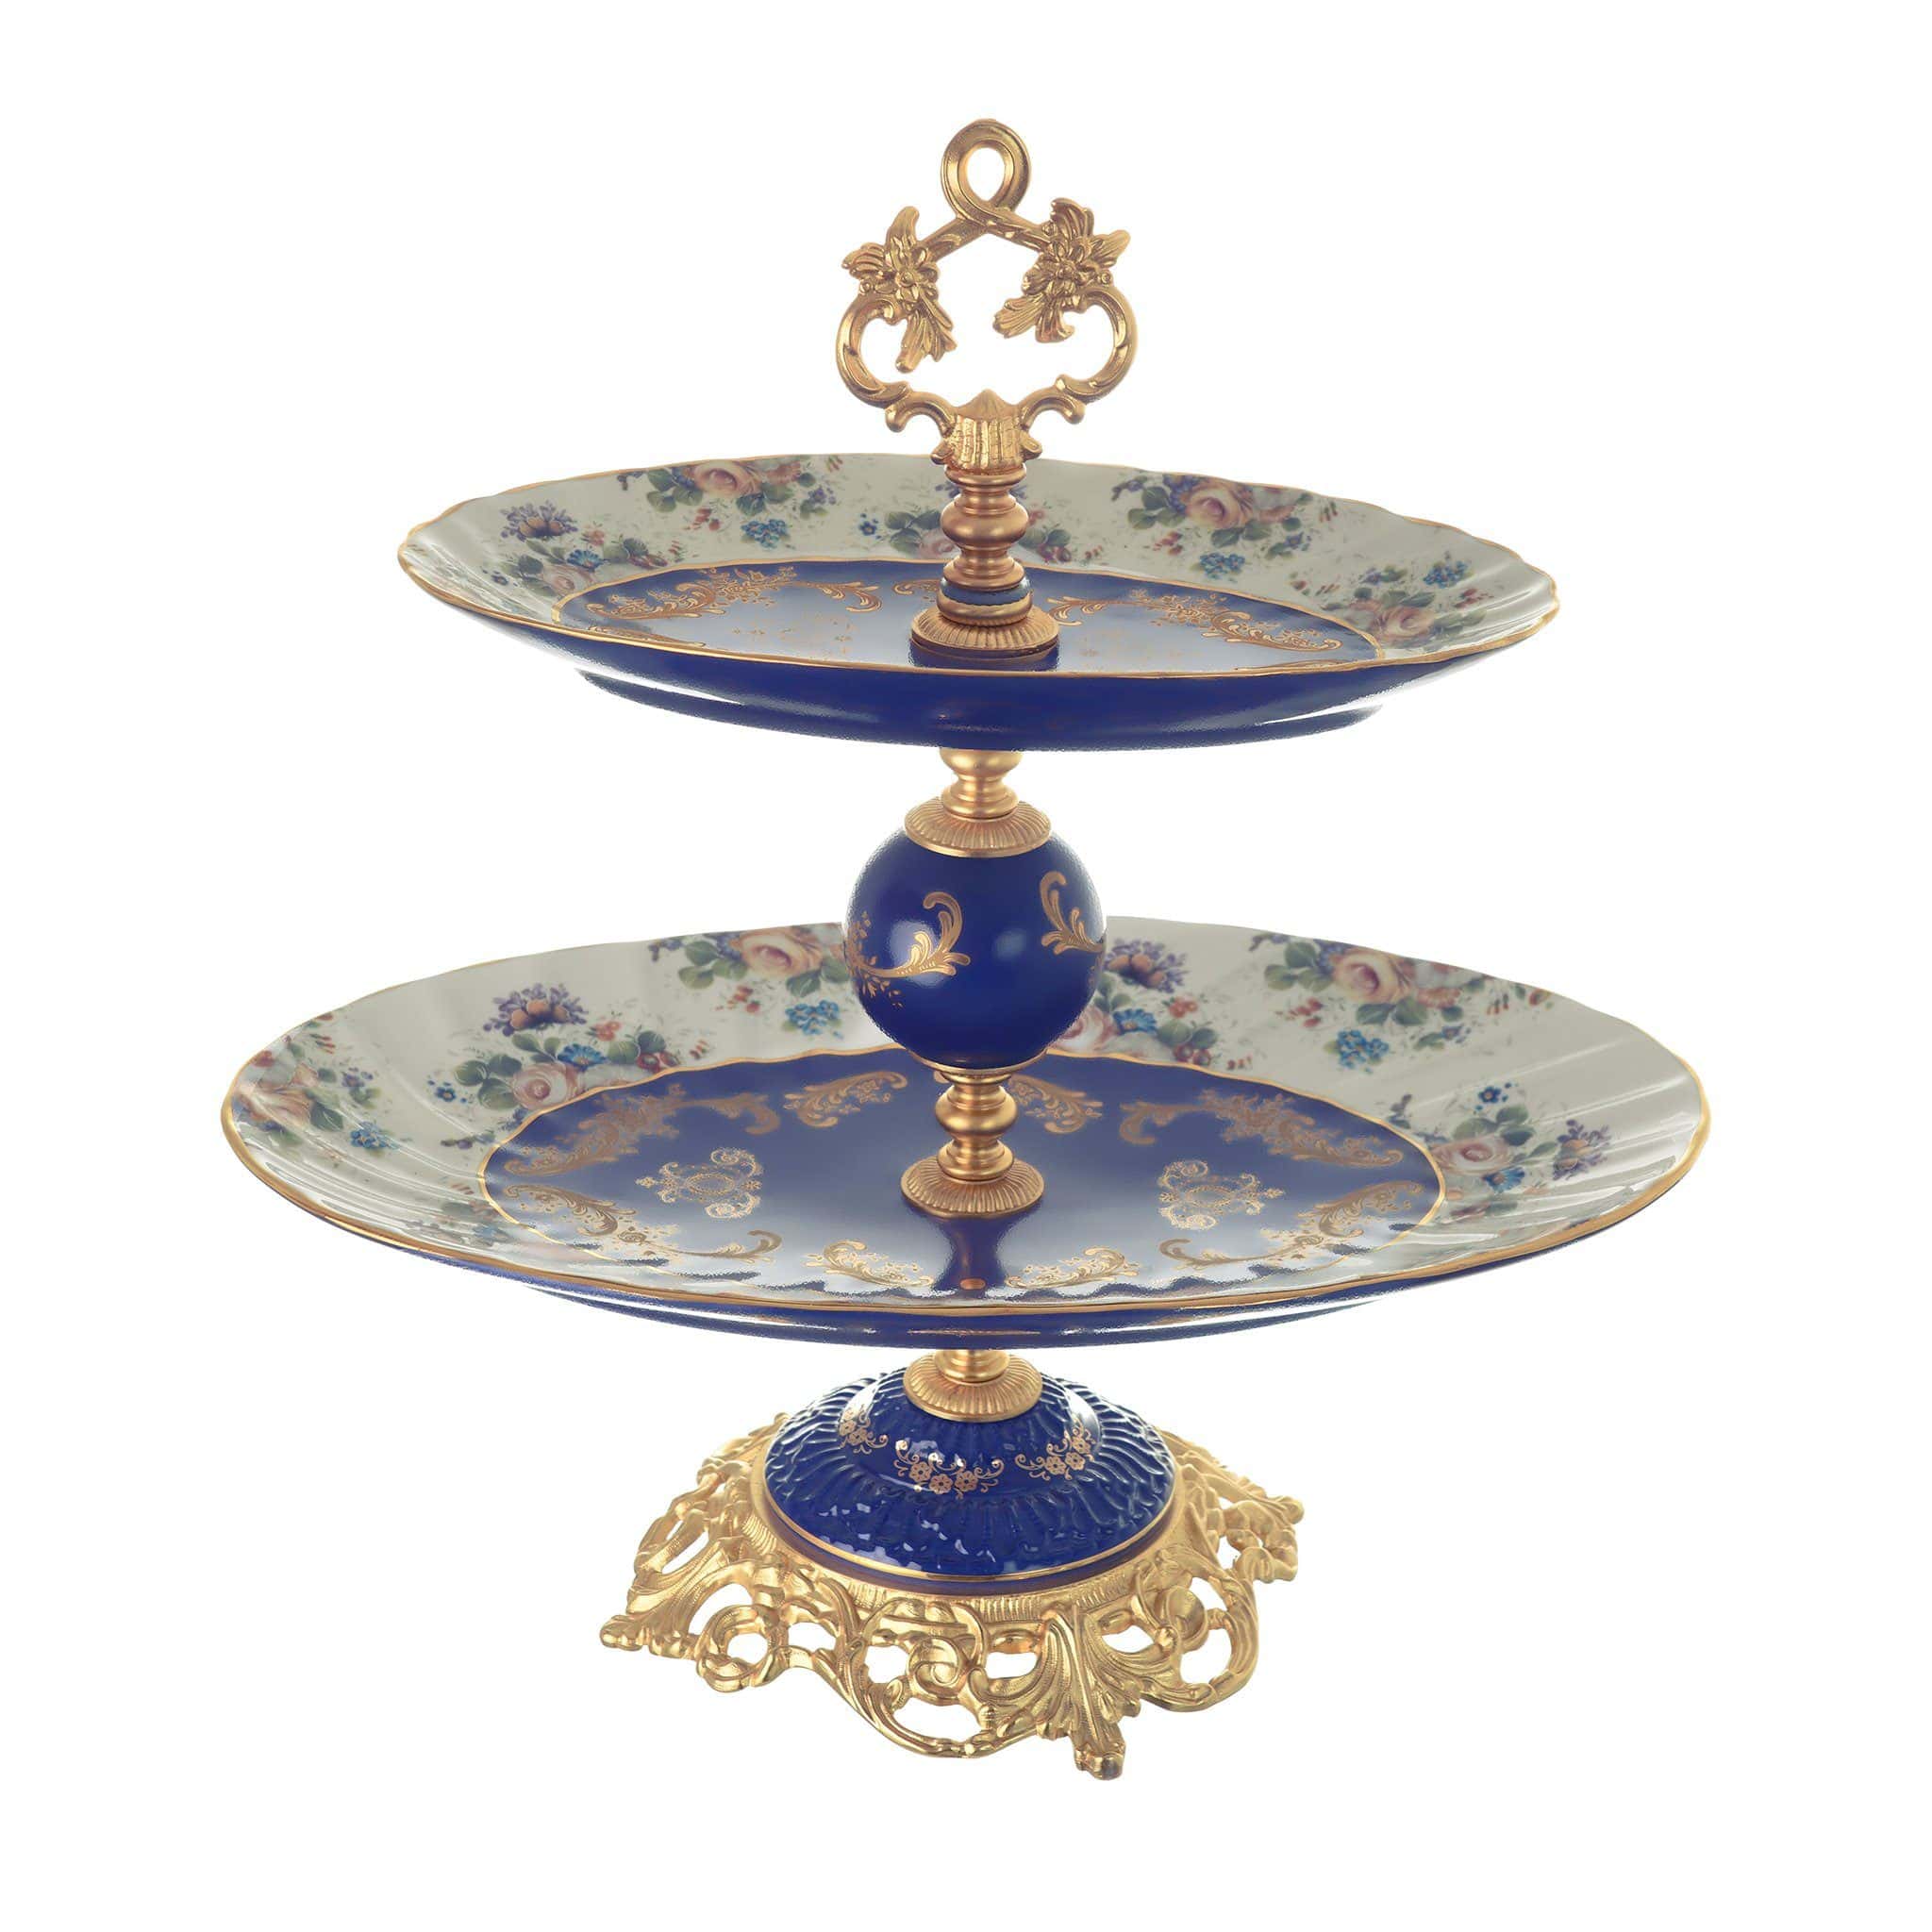 Caroline - Oval Stand 2 Tiers with Base - Floral Design - Blue & Gold - 43cm - 58000582